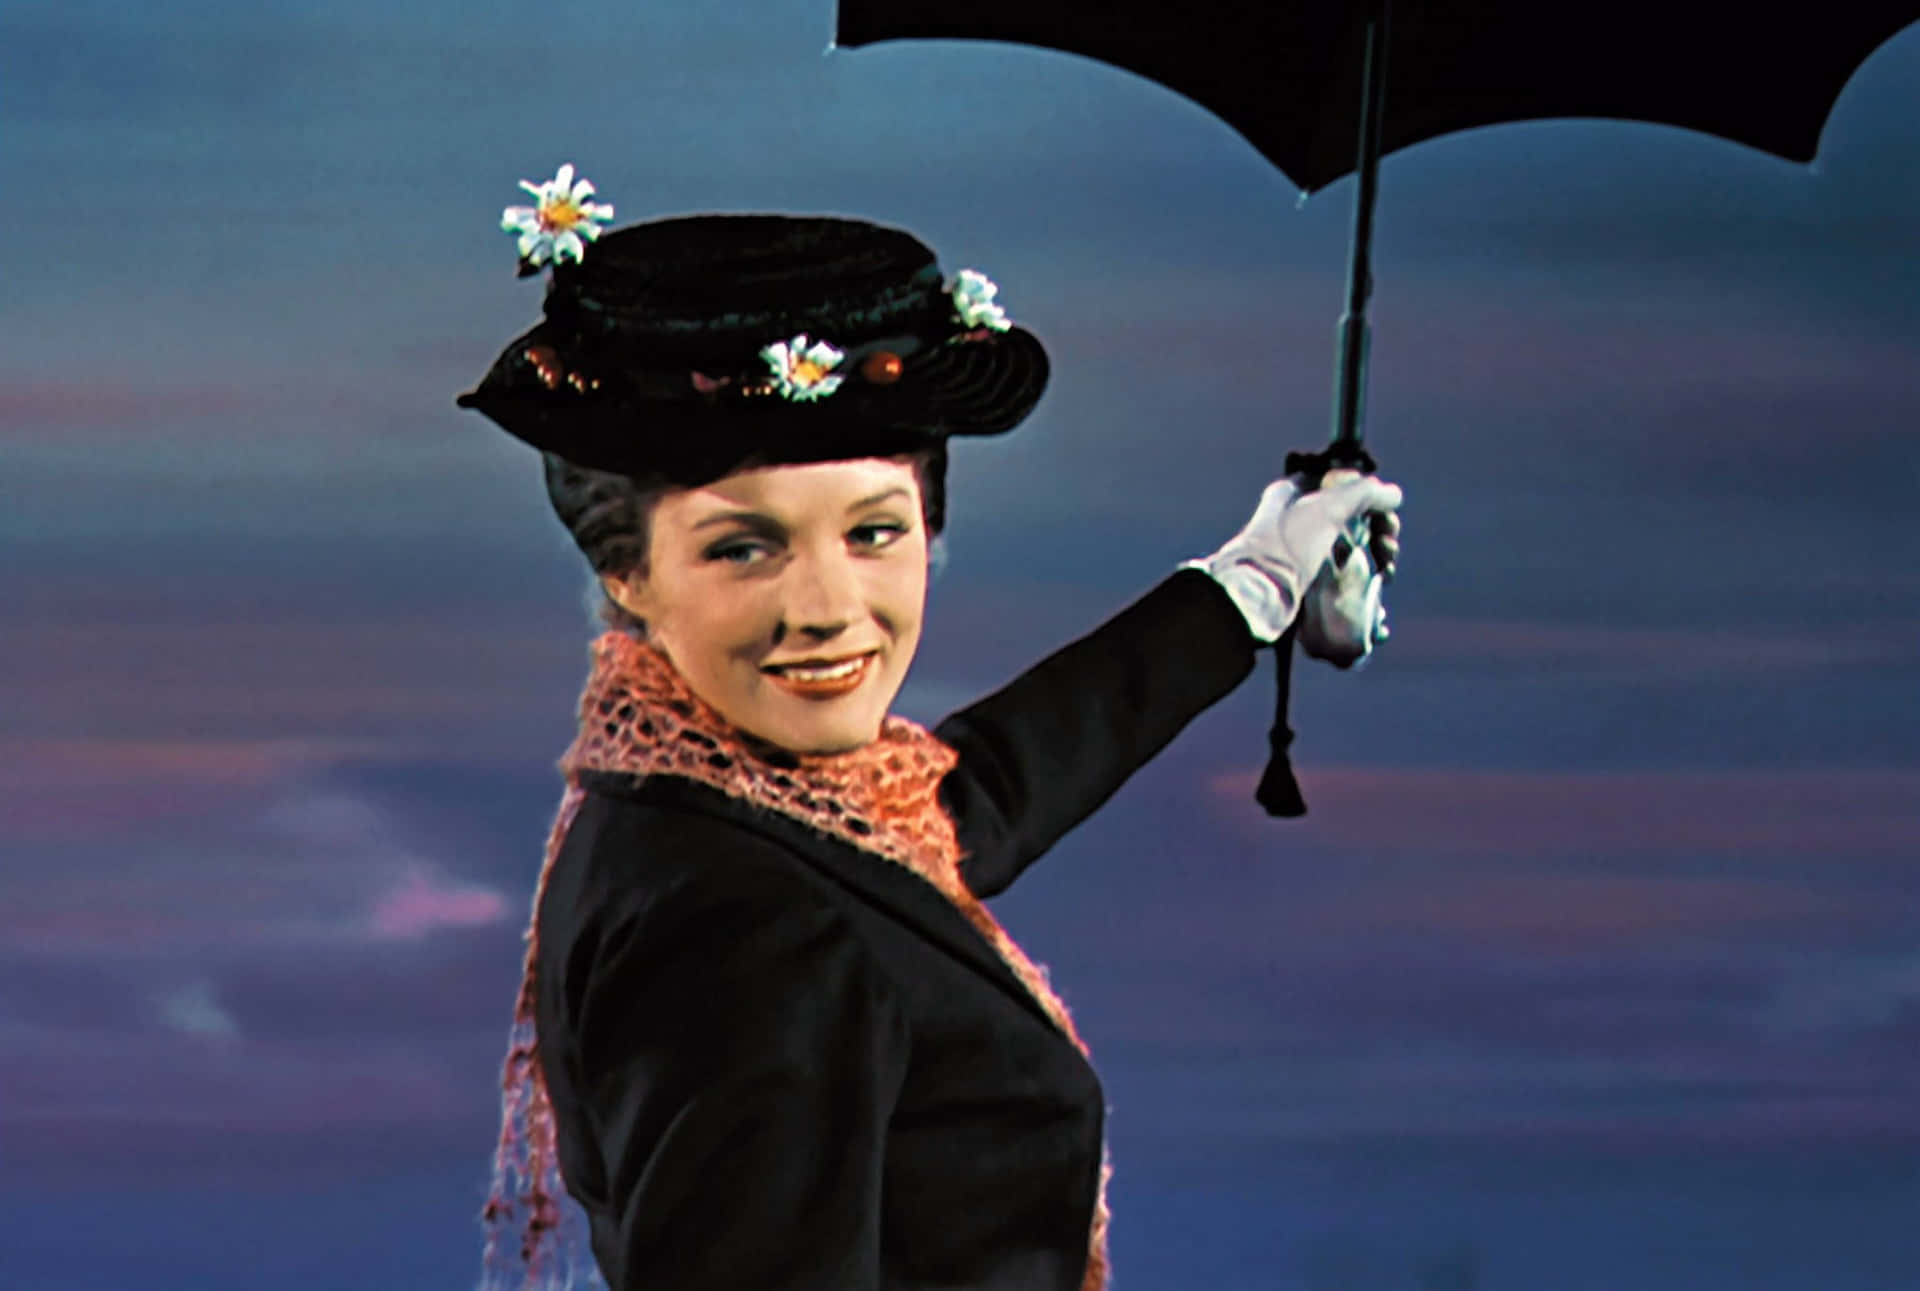 Mary Poppins Flying with Umbrella Wallpaper